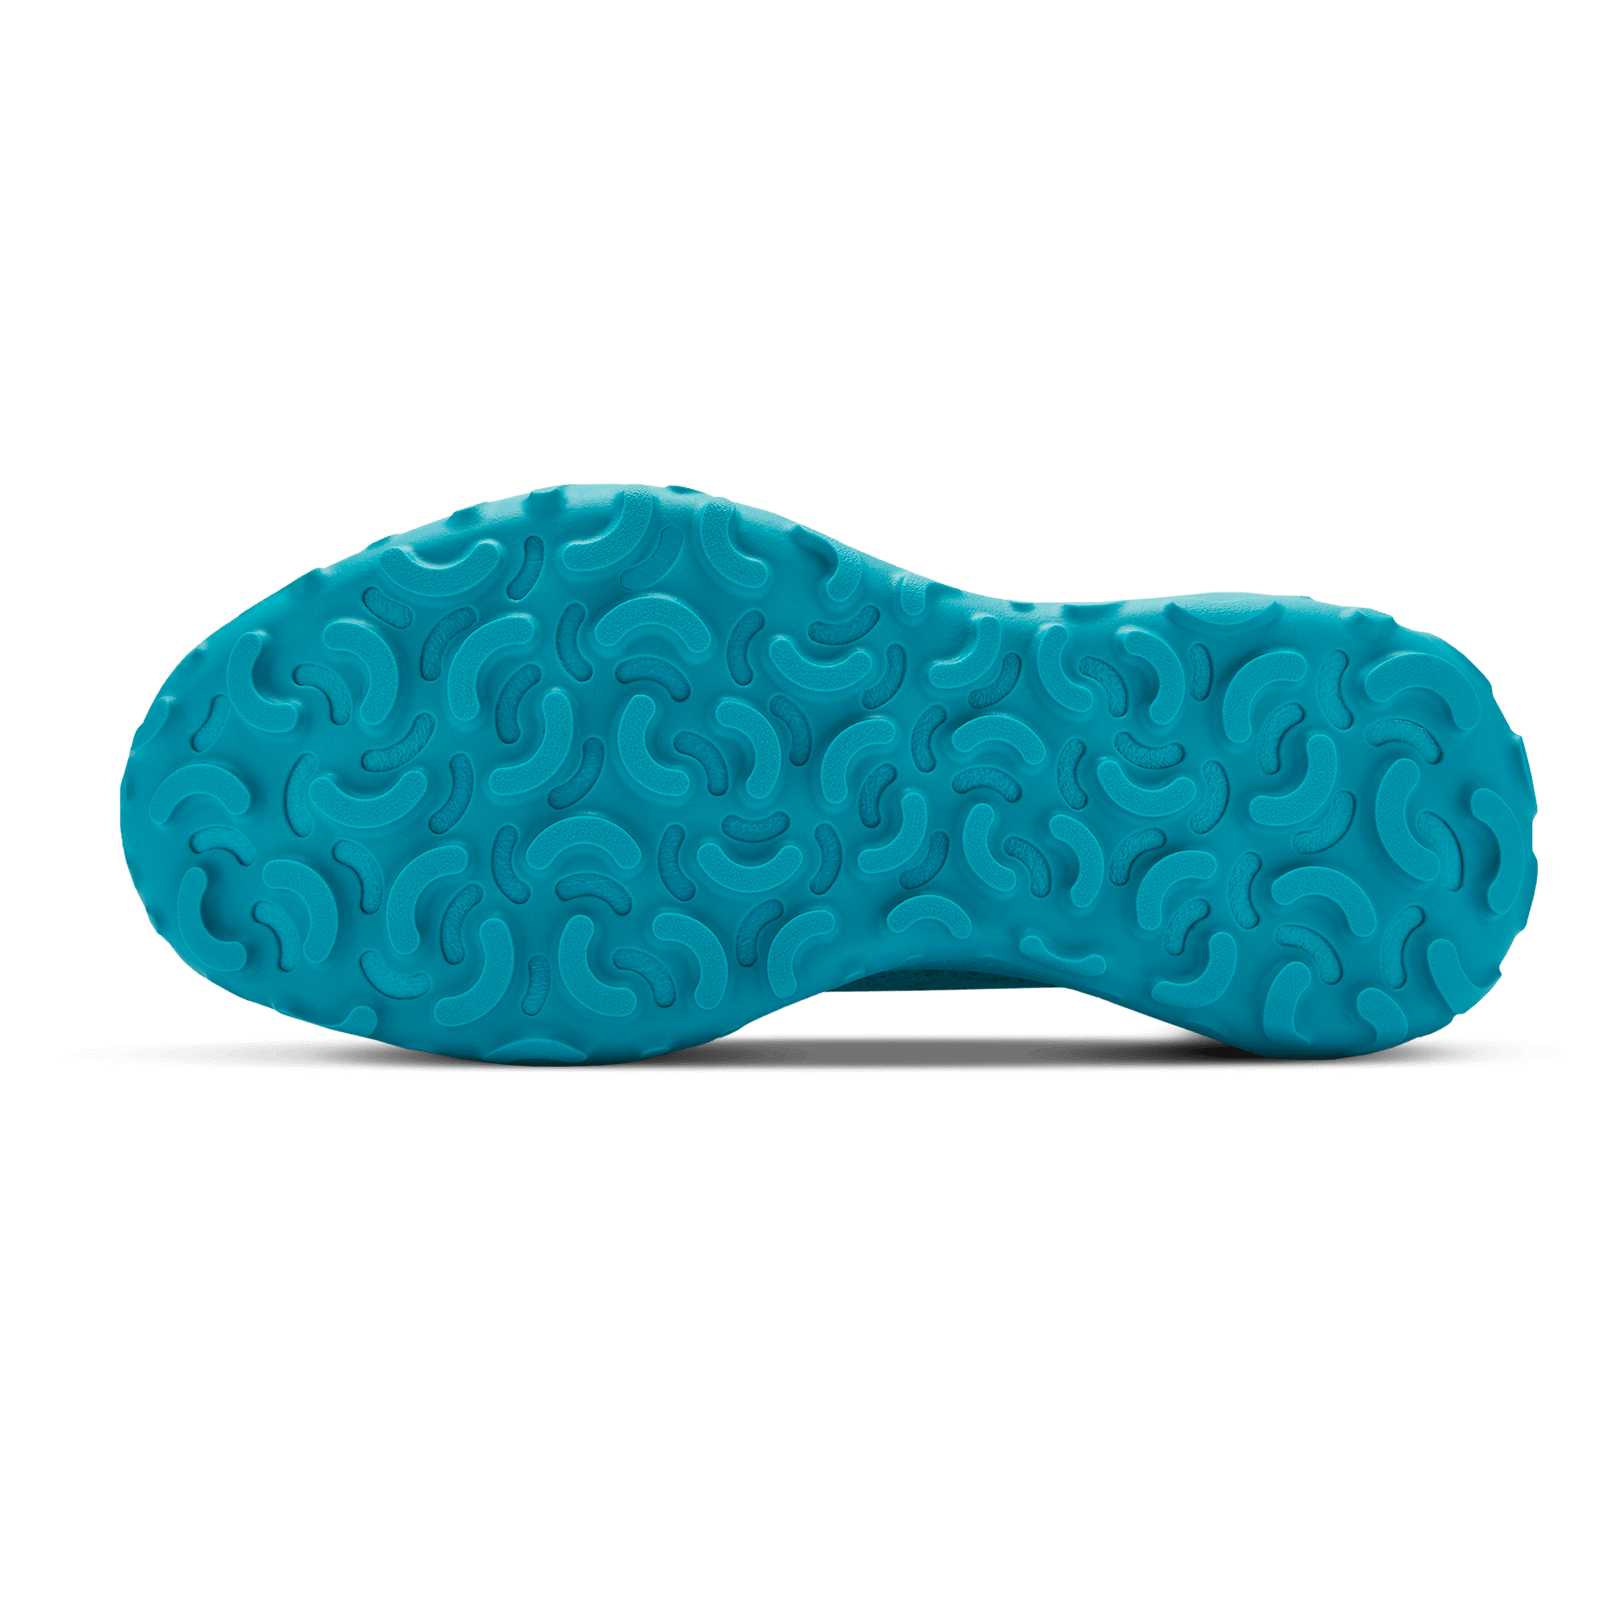 Women's Trail Runner SWT Mizzles - Thrive Teal (Thrive Teal Sole)